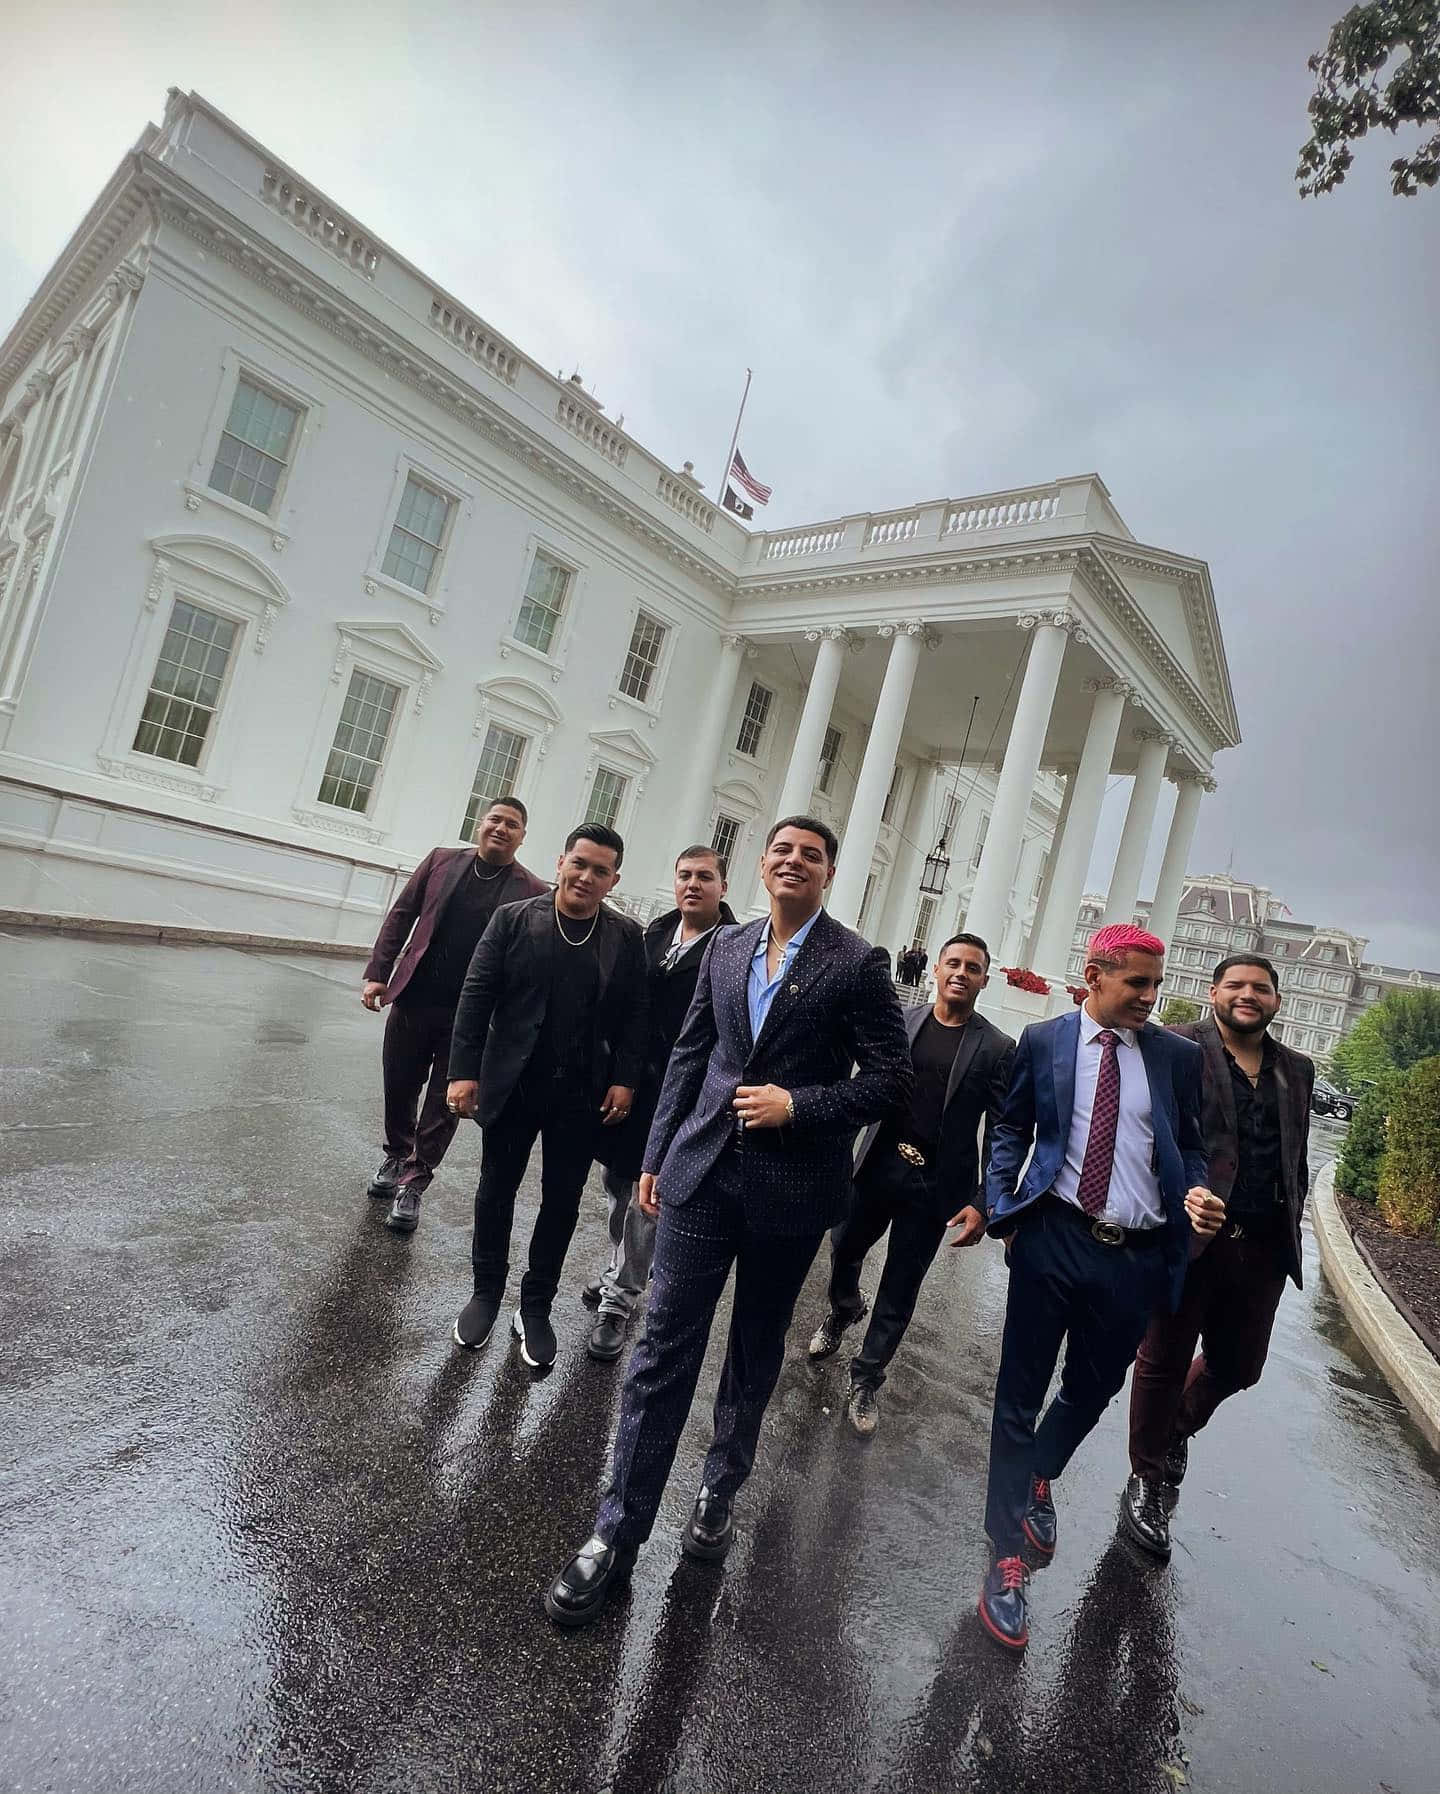 A Group Of Men Walking In Front Of The White House Wallpaper